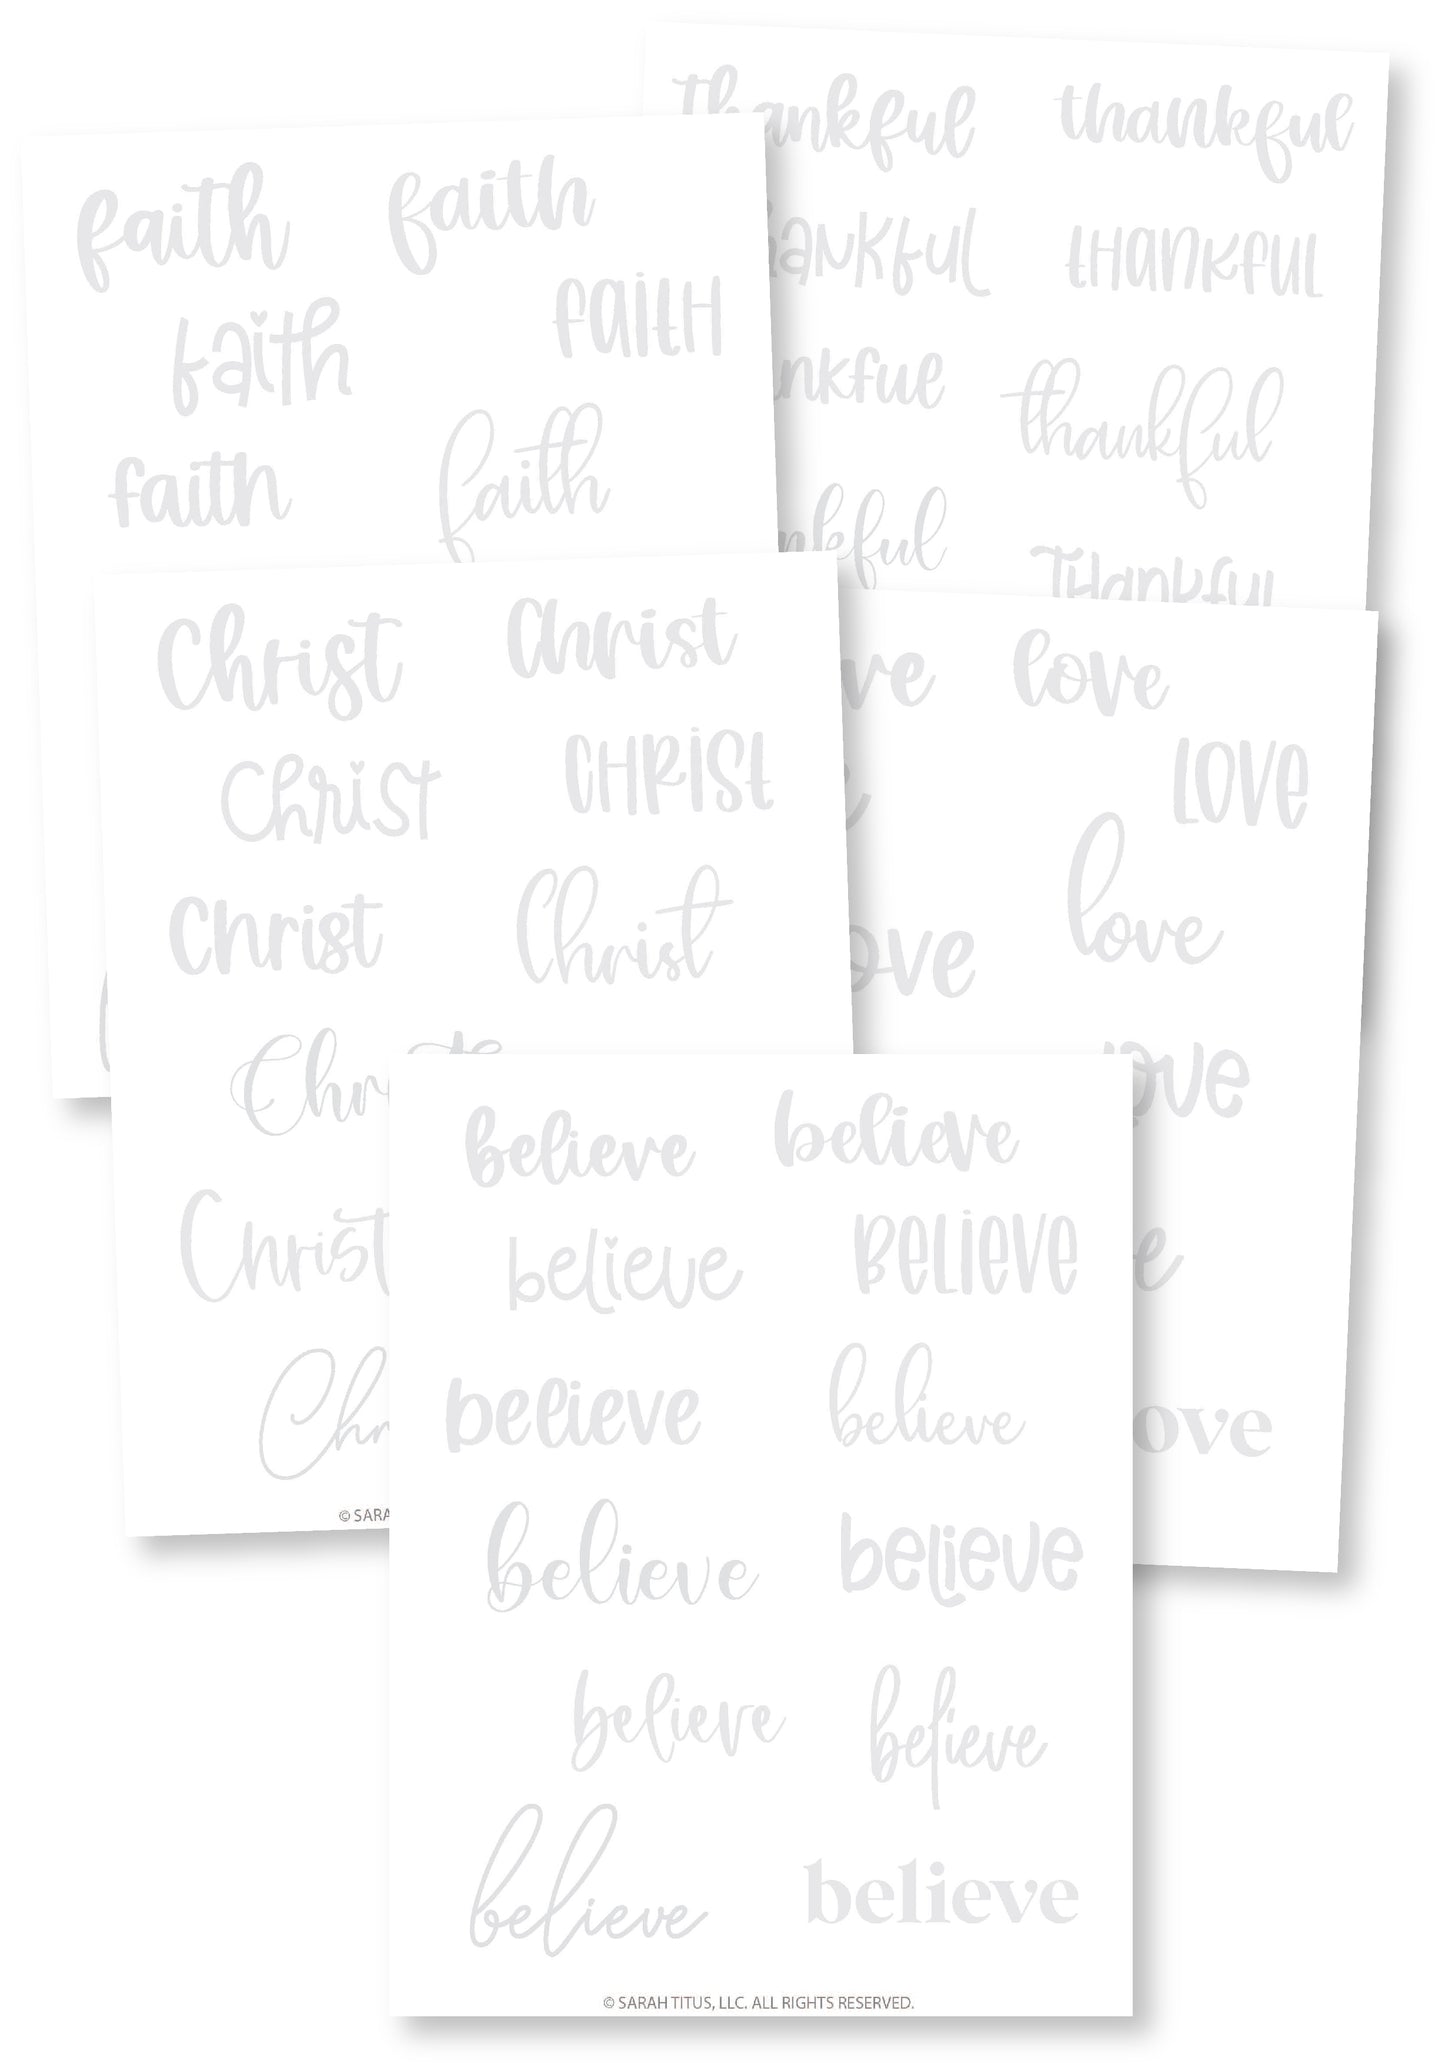 Christian Hand Lettering Practice Words